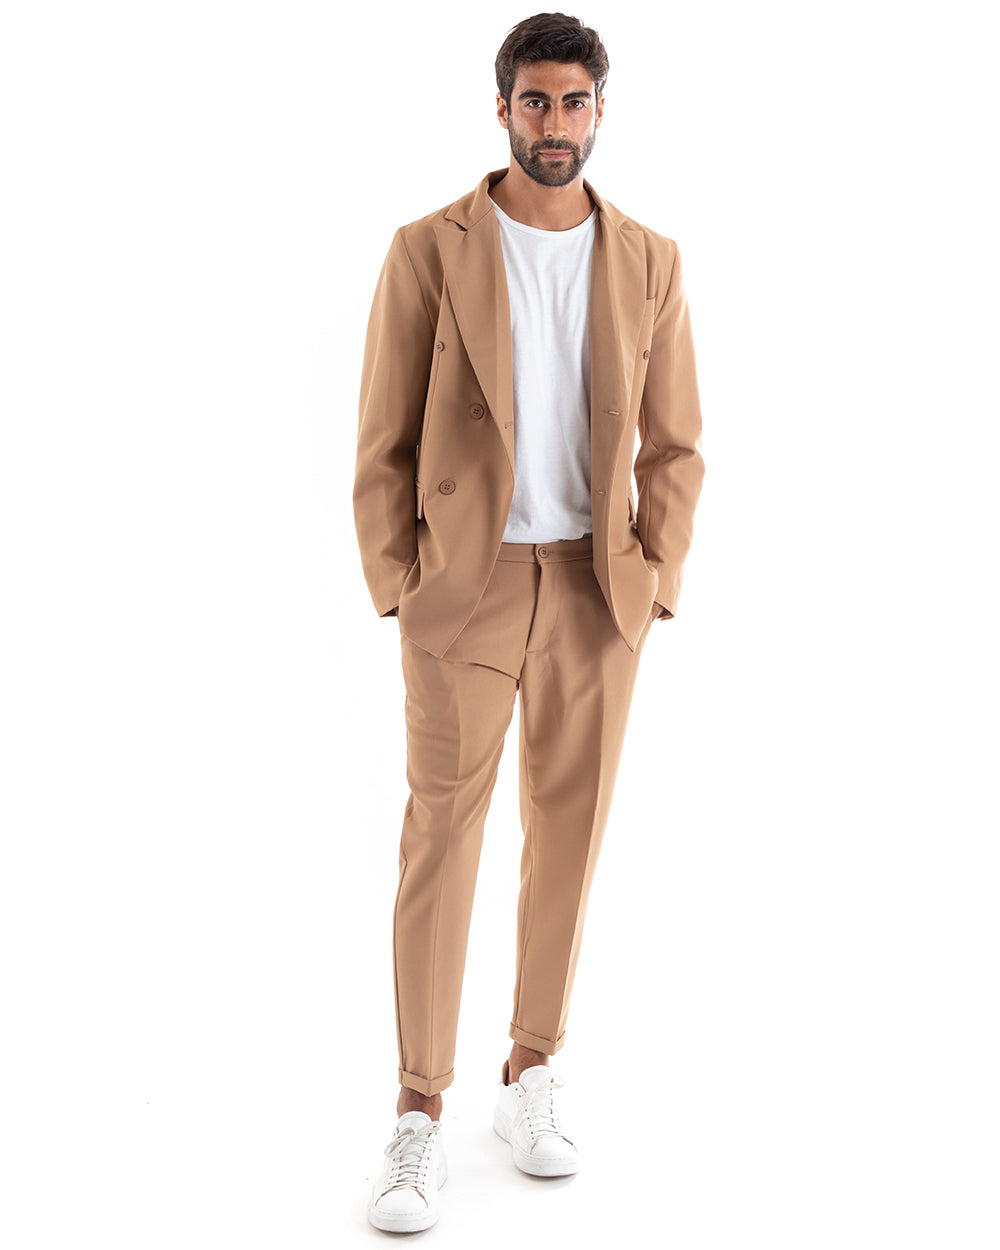 Double-Breasted Men's Suit Viscose Suit Jacket Trousers Camel Elegant Sporty Ceremony GIOSAL-OU2158A